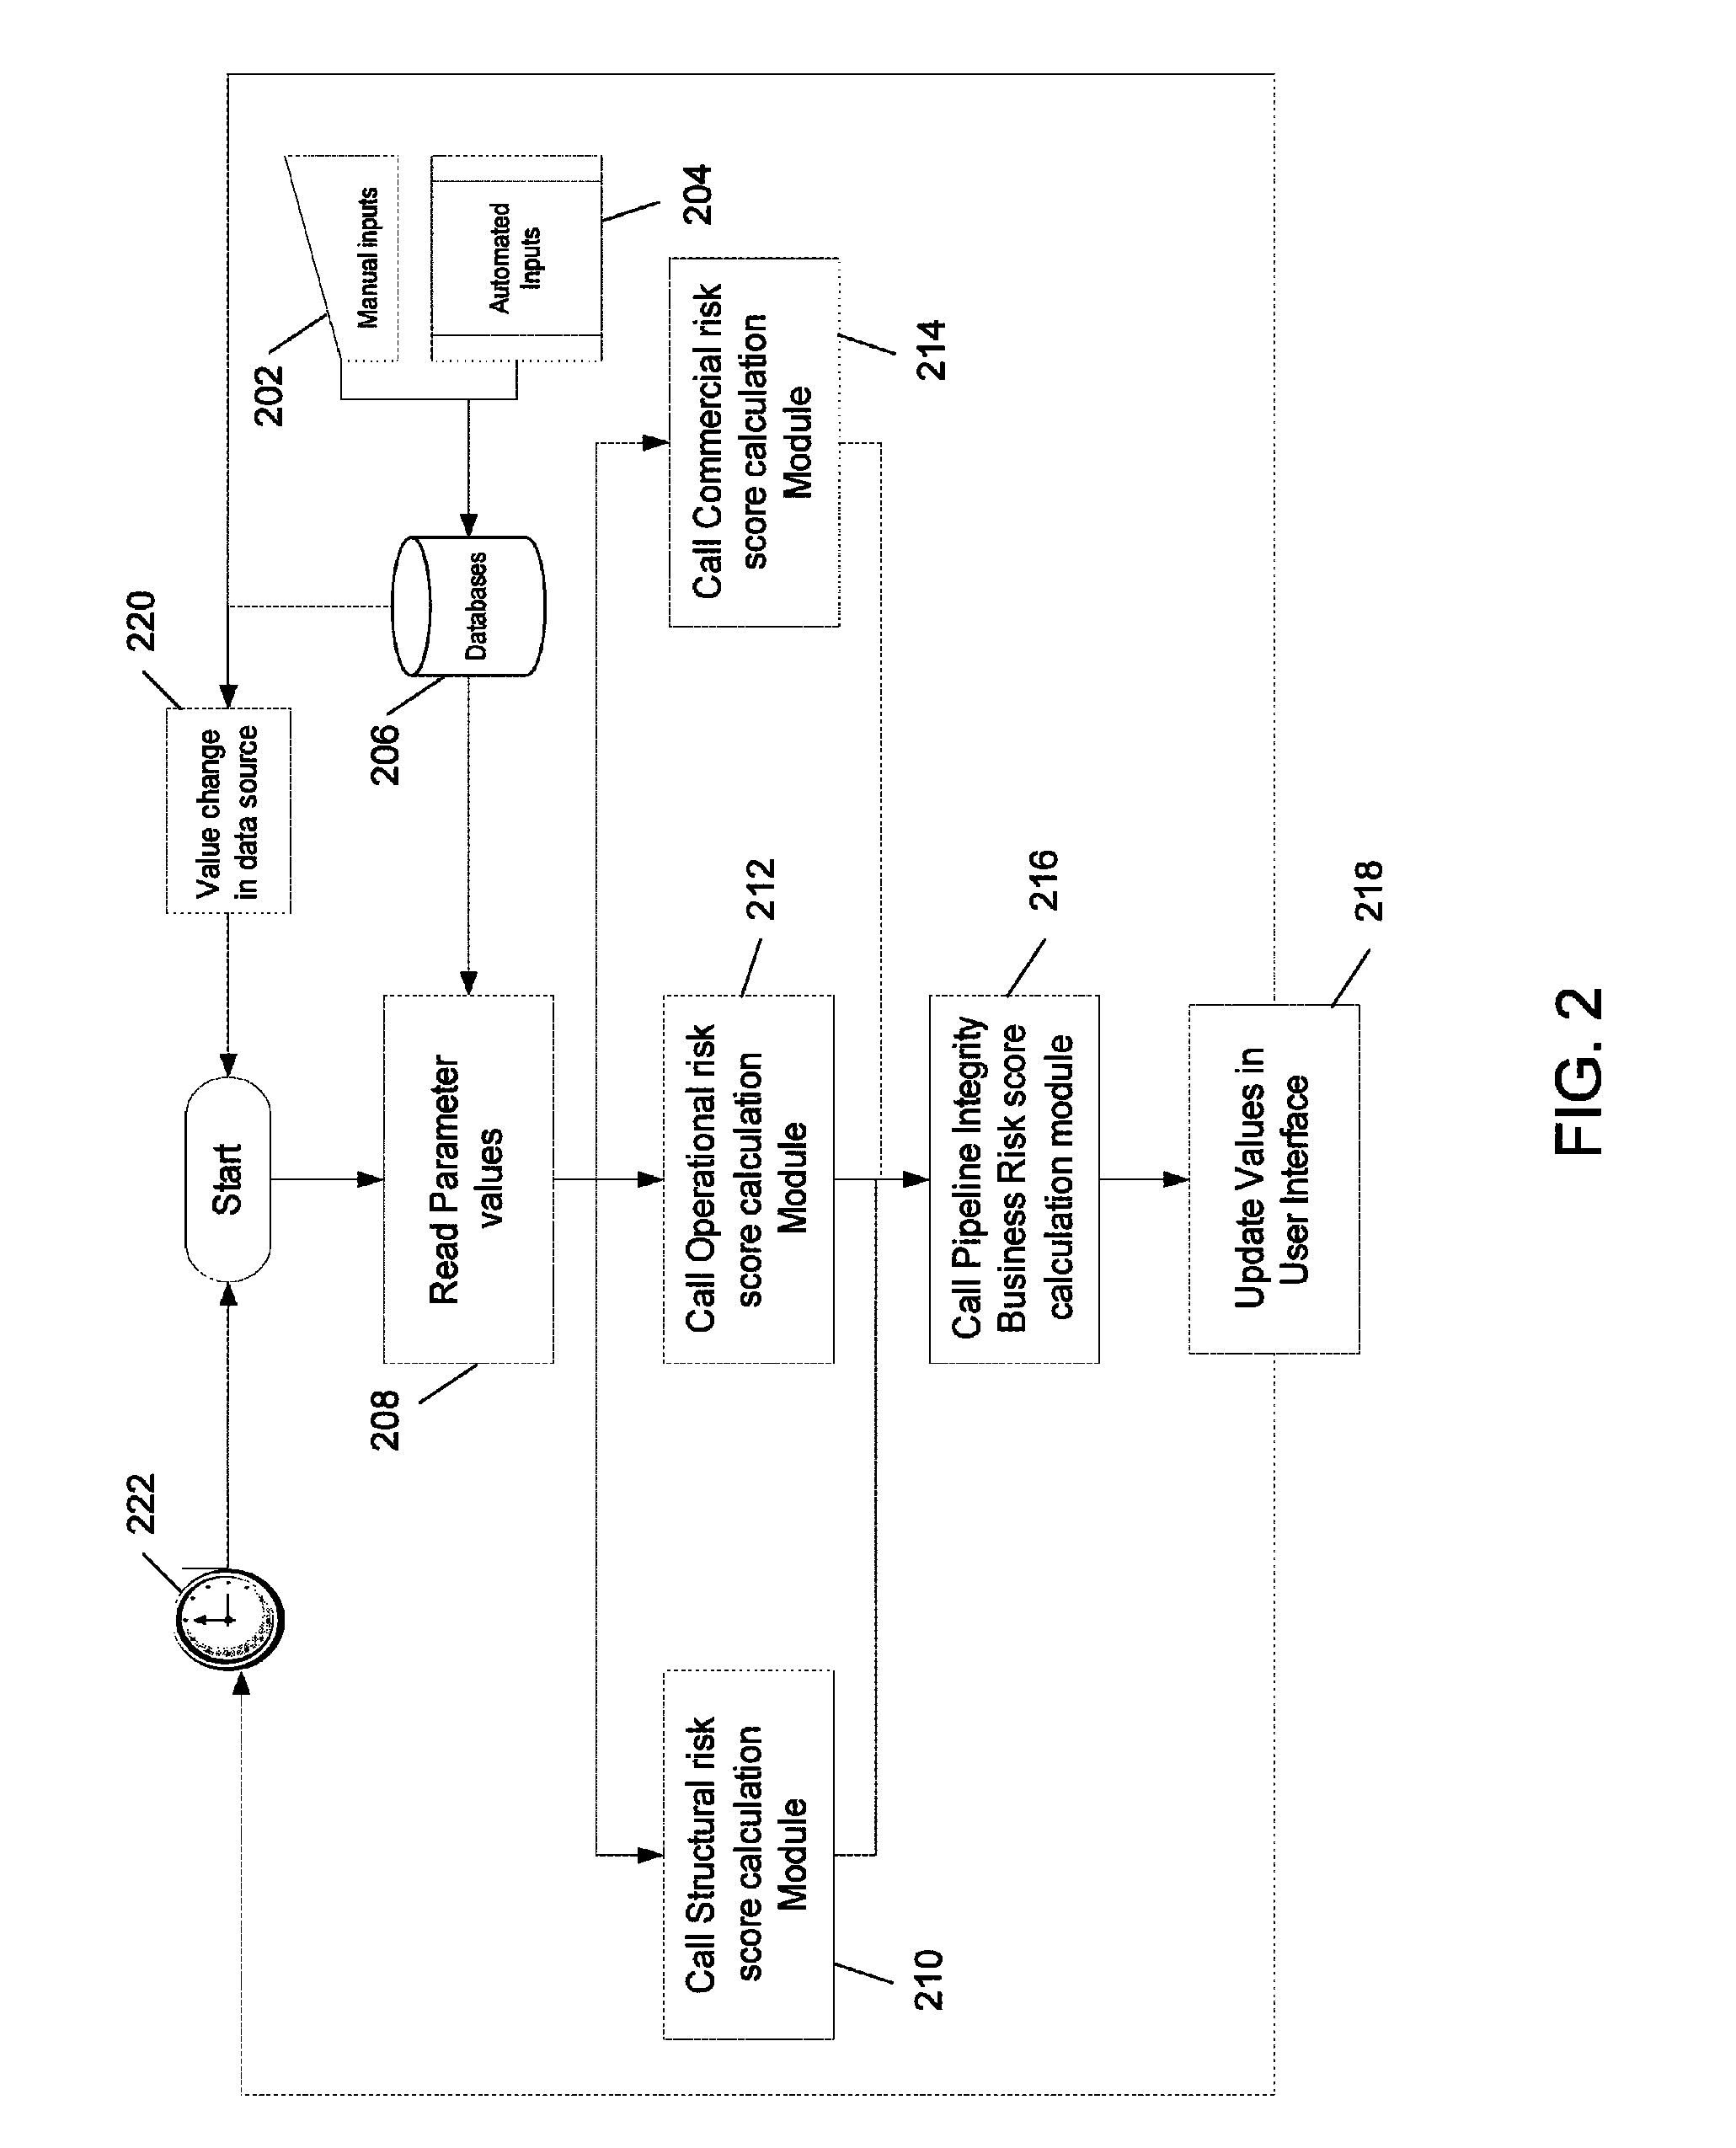 System and method for calculating a comprehensive pipeline integrity business risk score